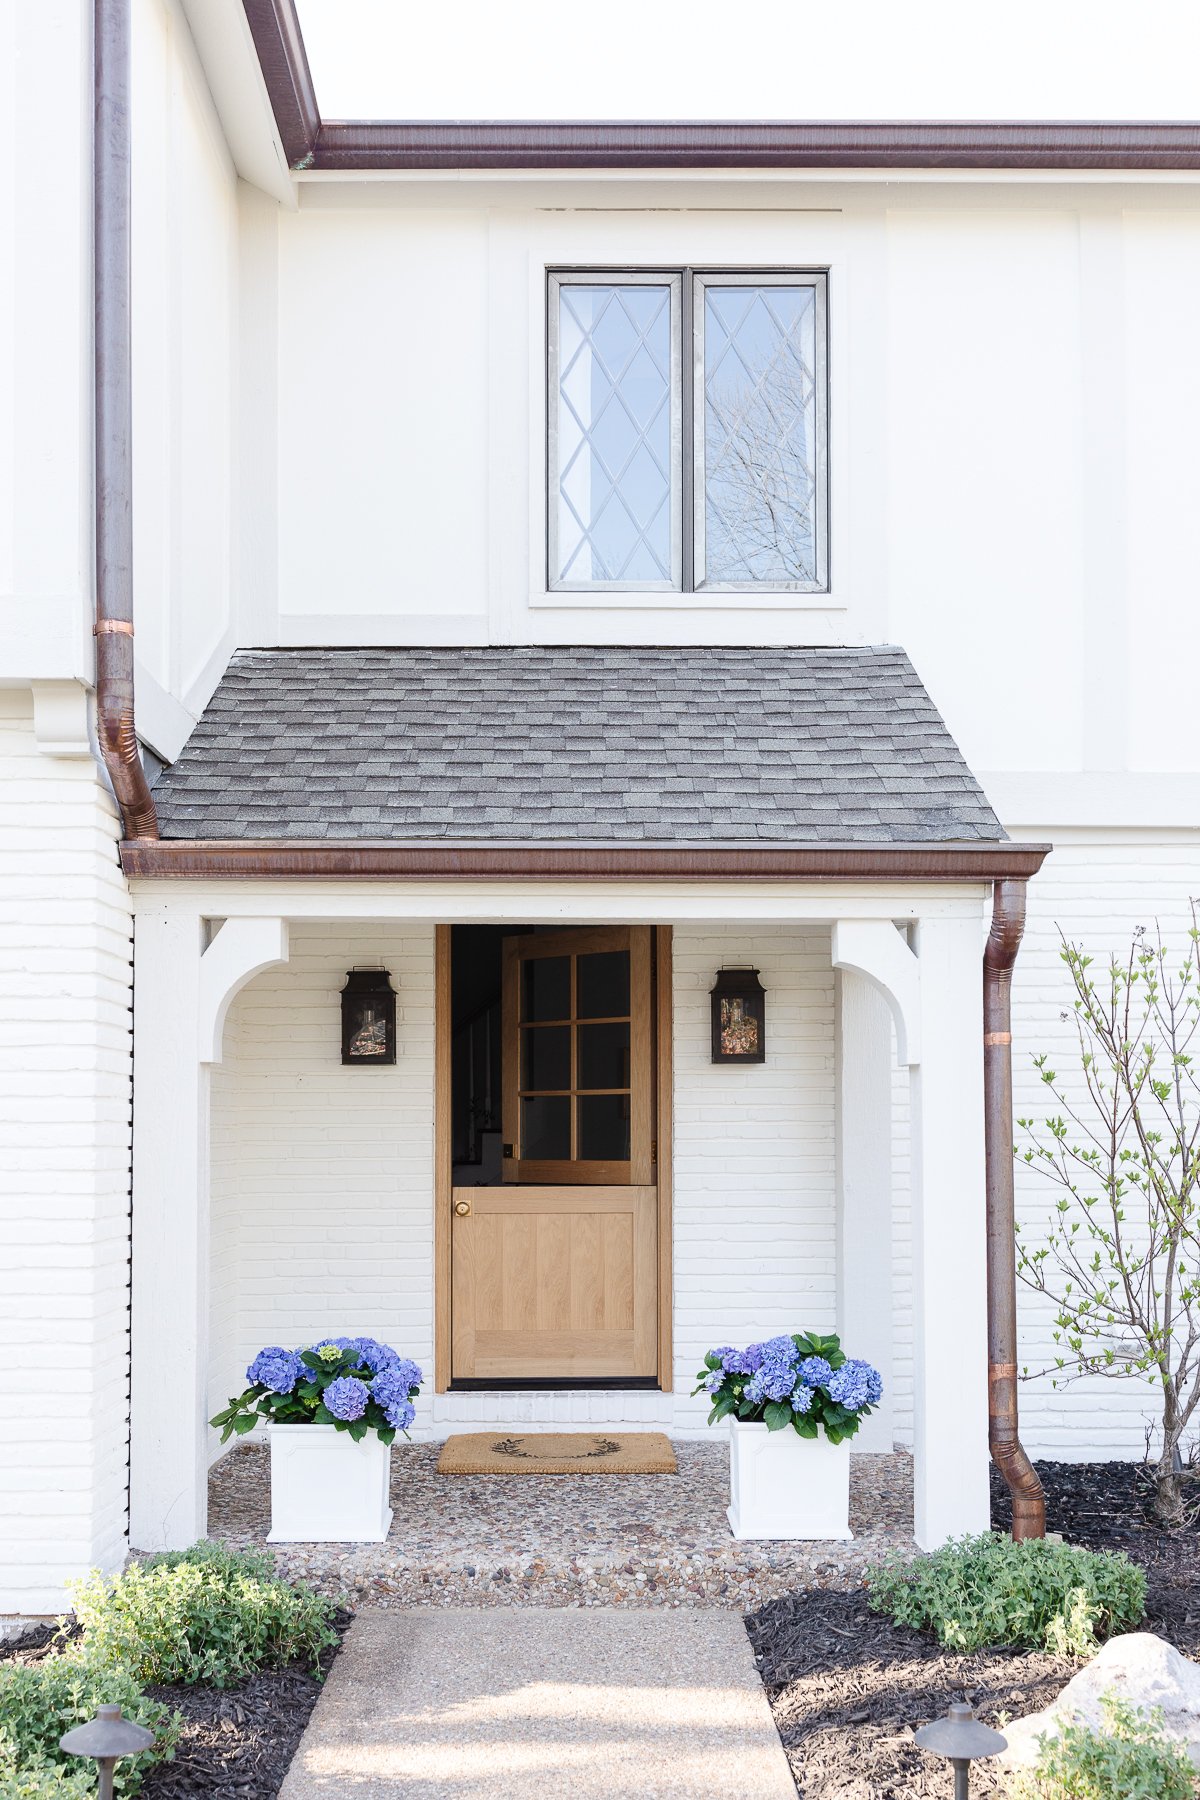 A front entrance of a house with a Benjamin Moore Swiss Coffee exterior, wooden door, and two potted plants.